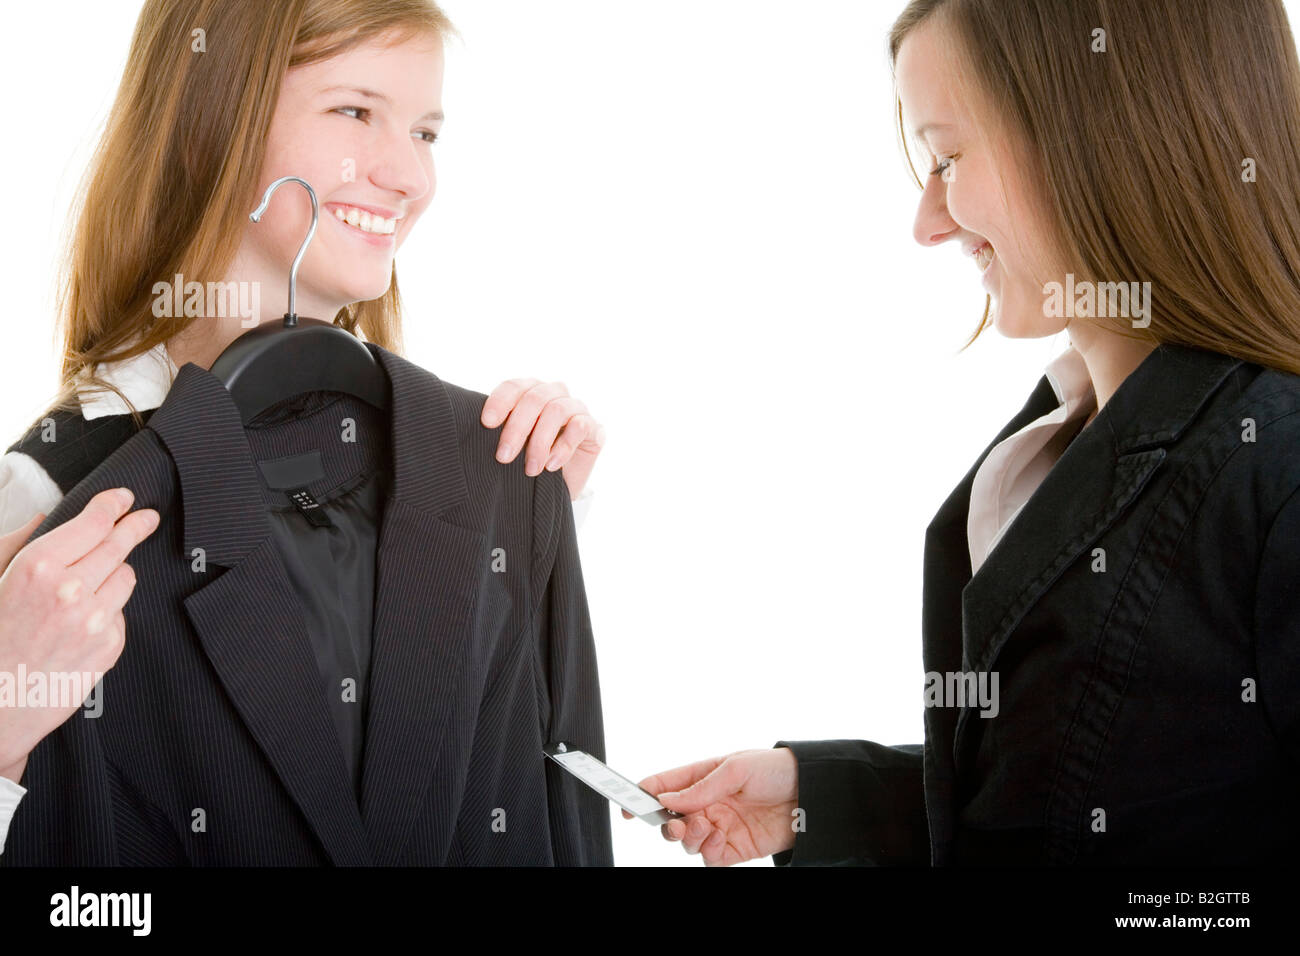 fitting young women female suit secretary suit clothes people Stock Photo